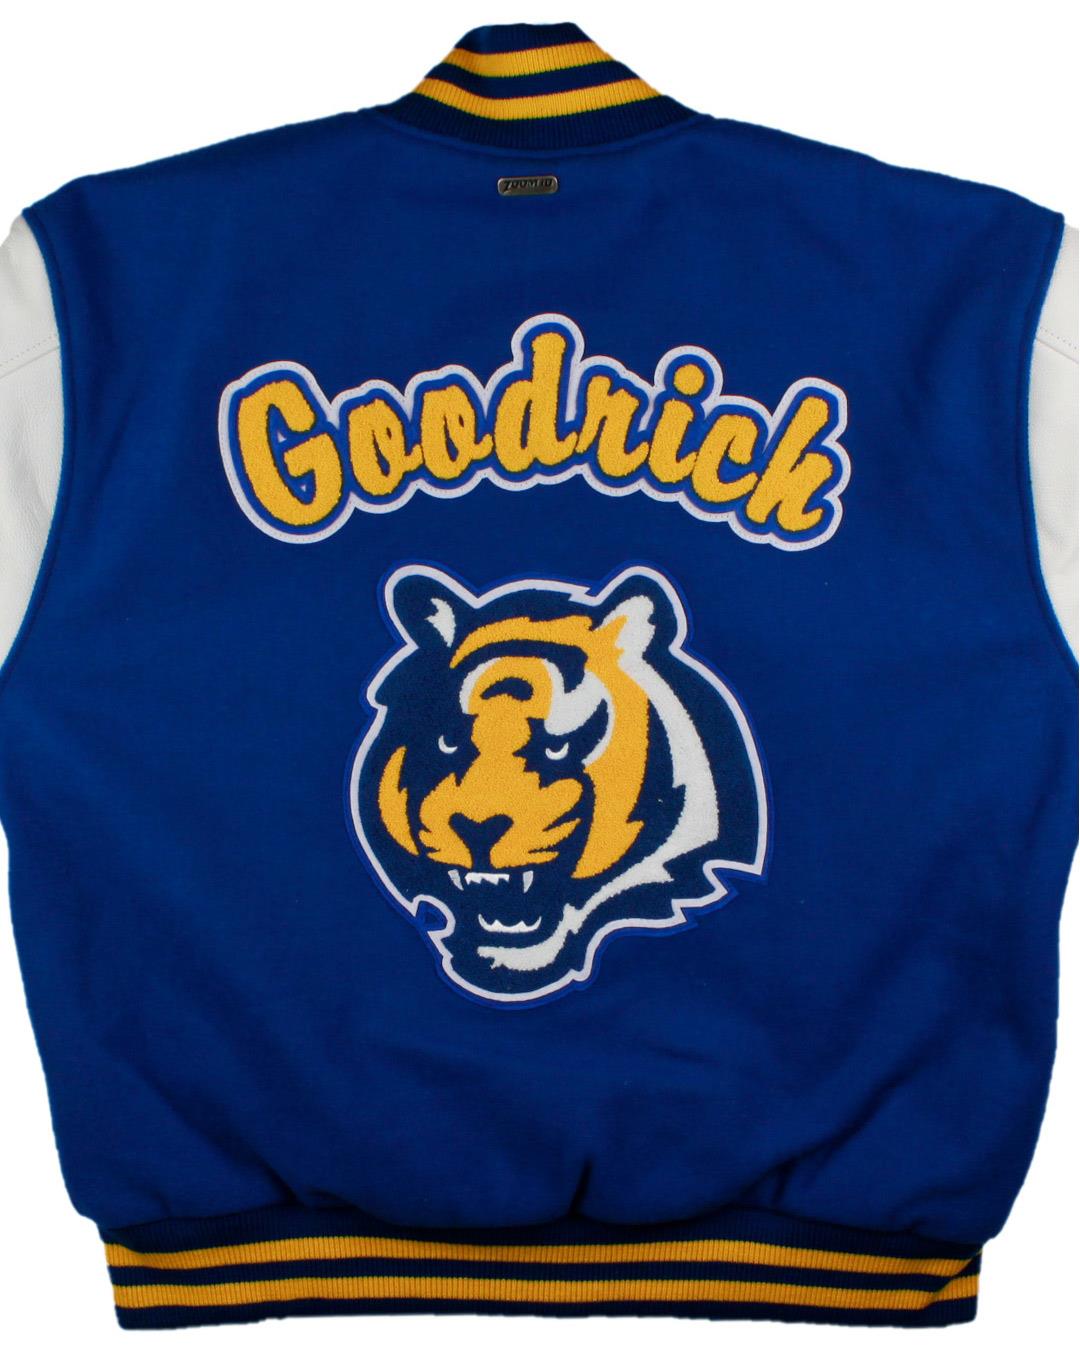 Stanfield High School Letterman, Stanfield, OR - Back